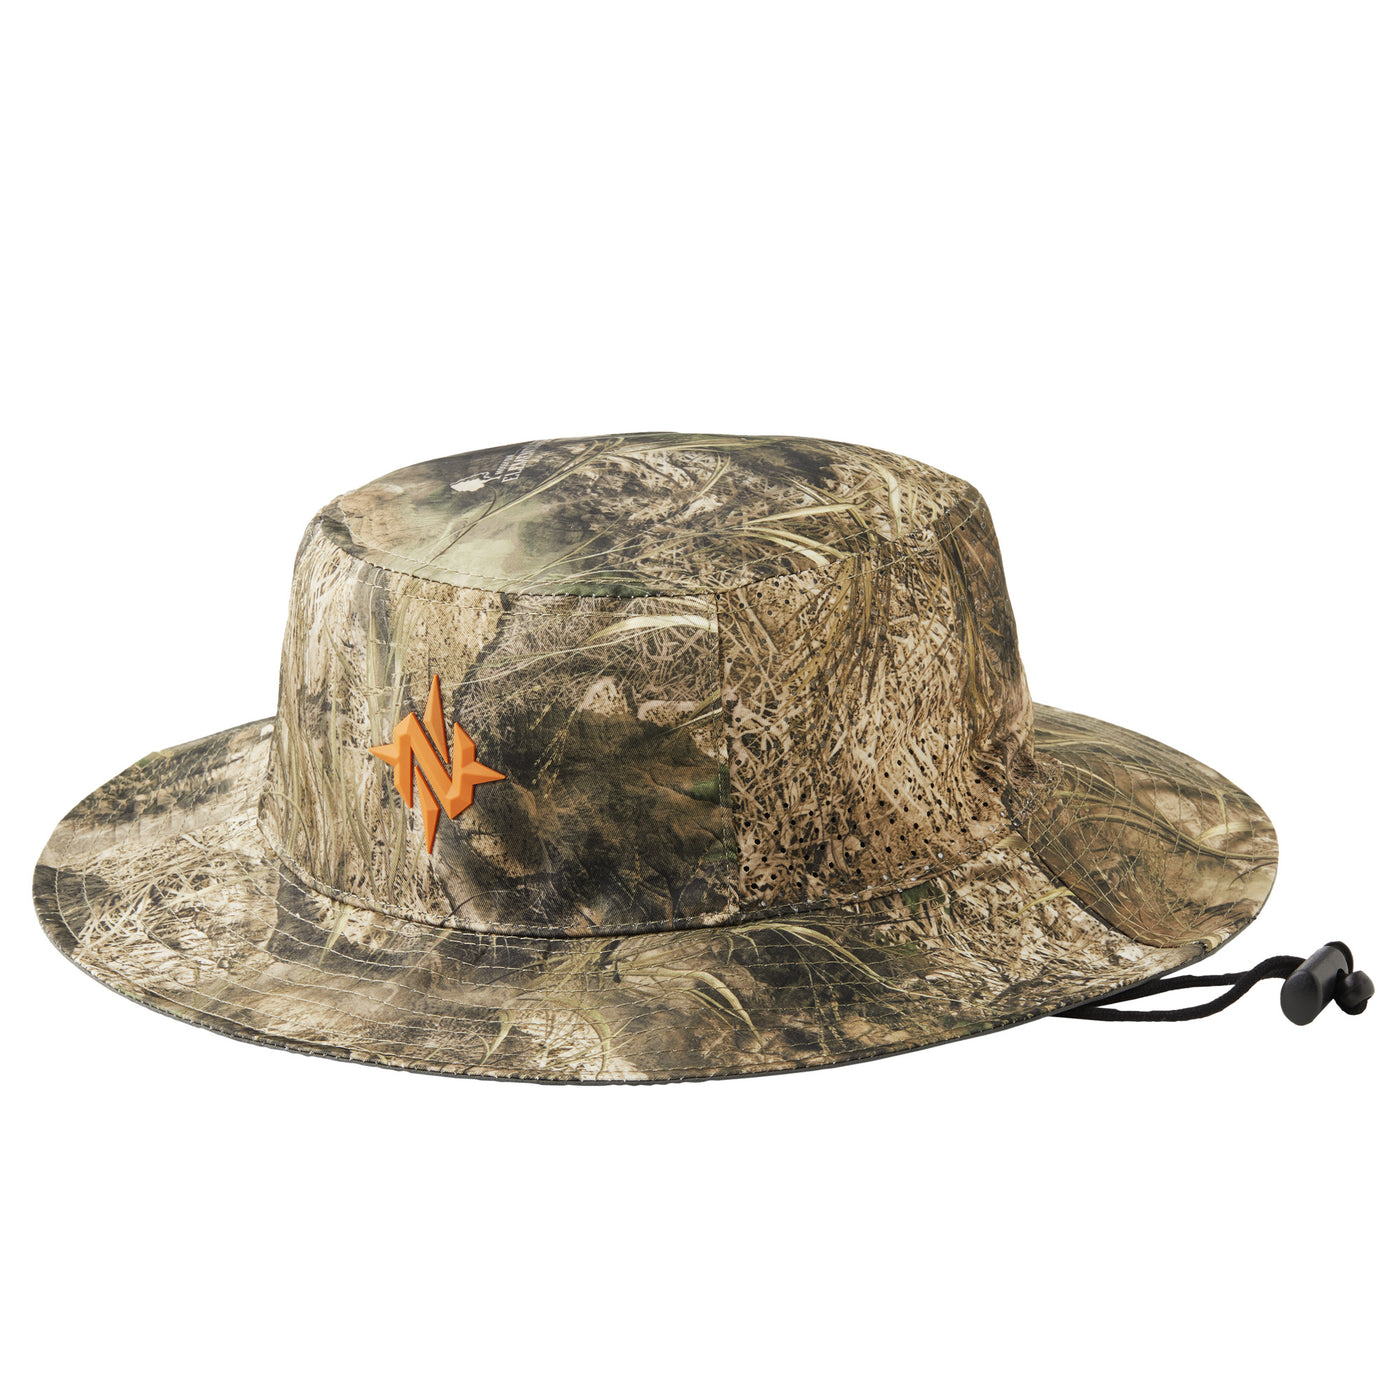 Nomad Culture - Bucket Hat for Women